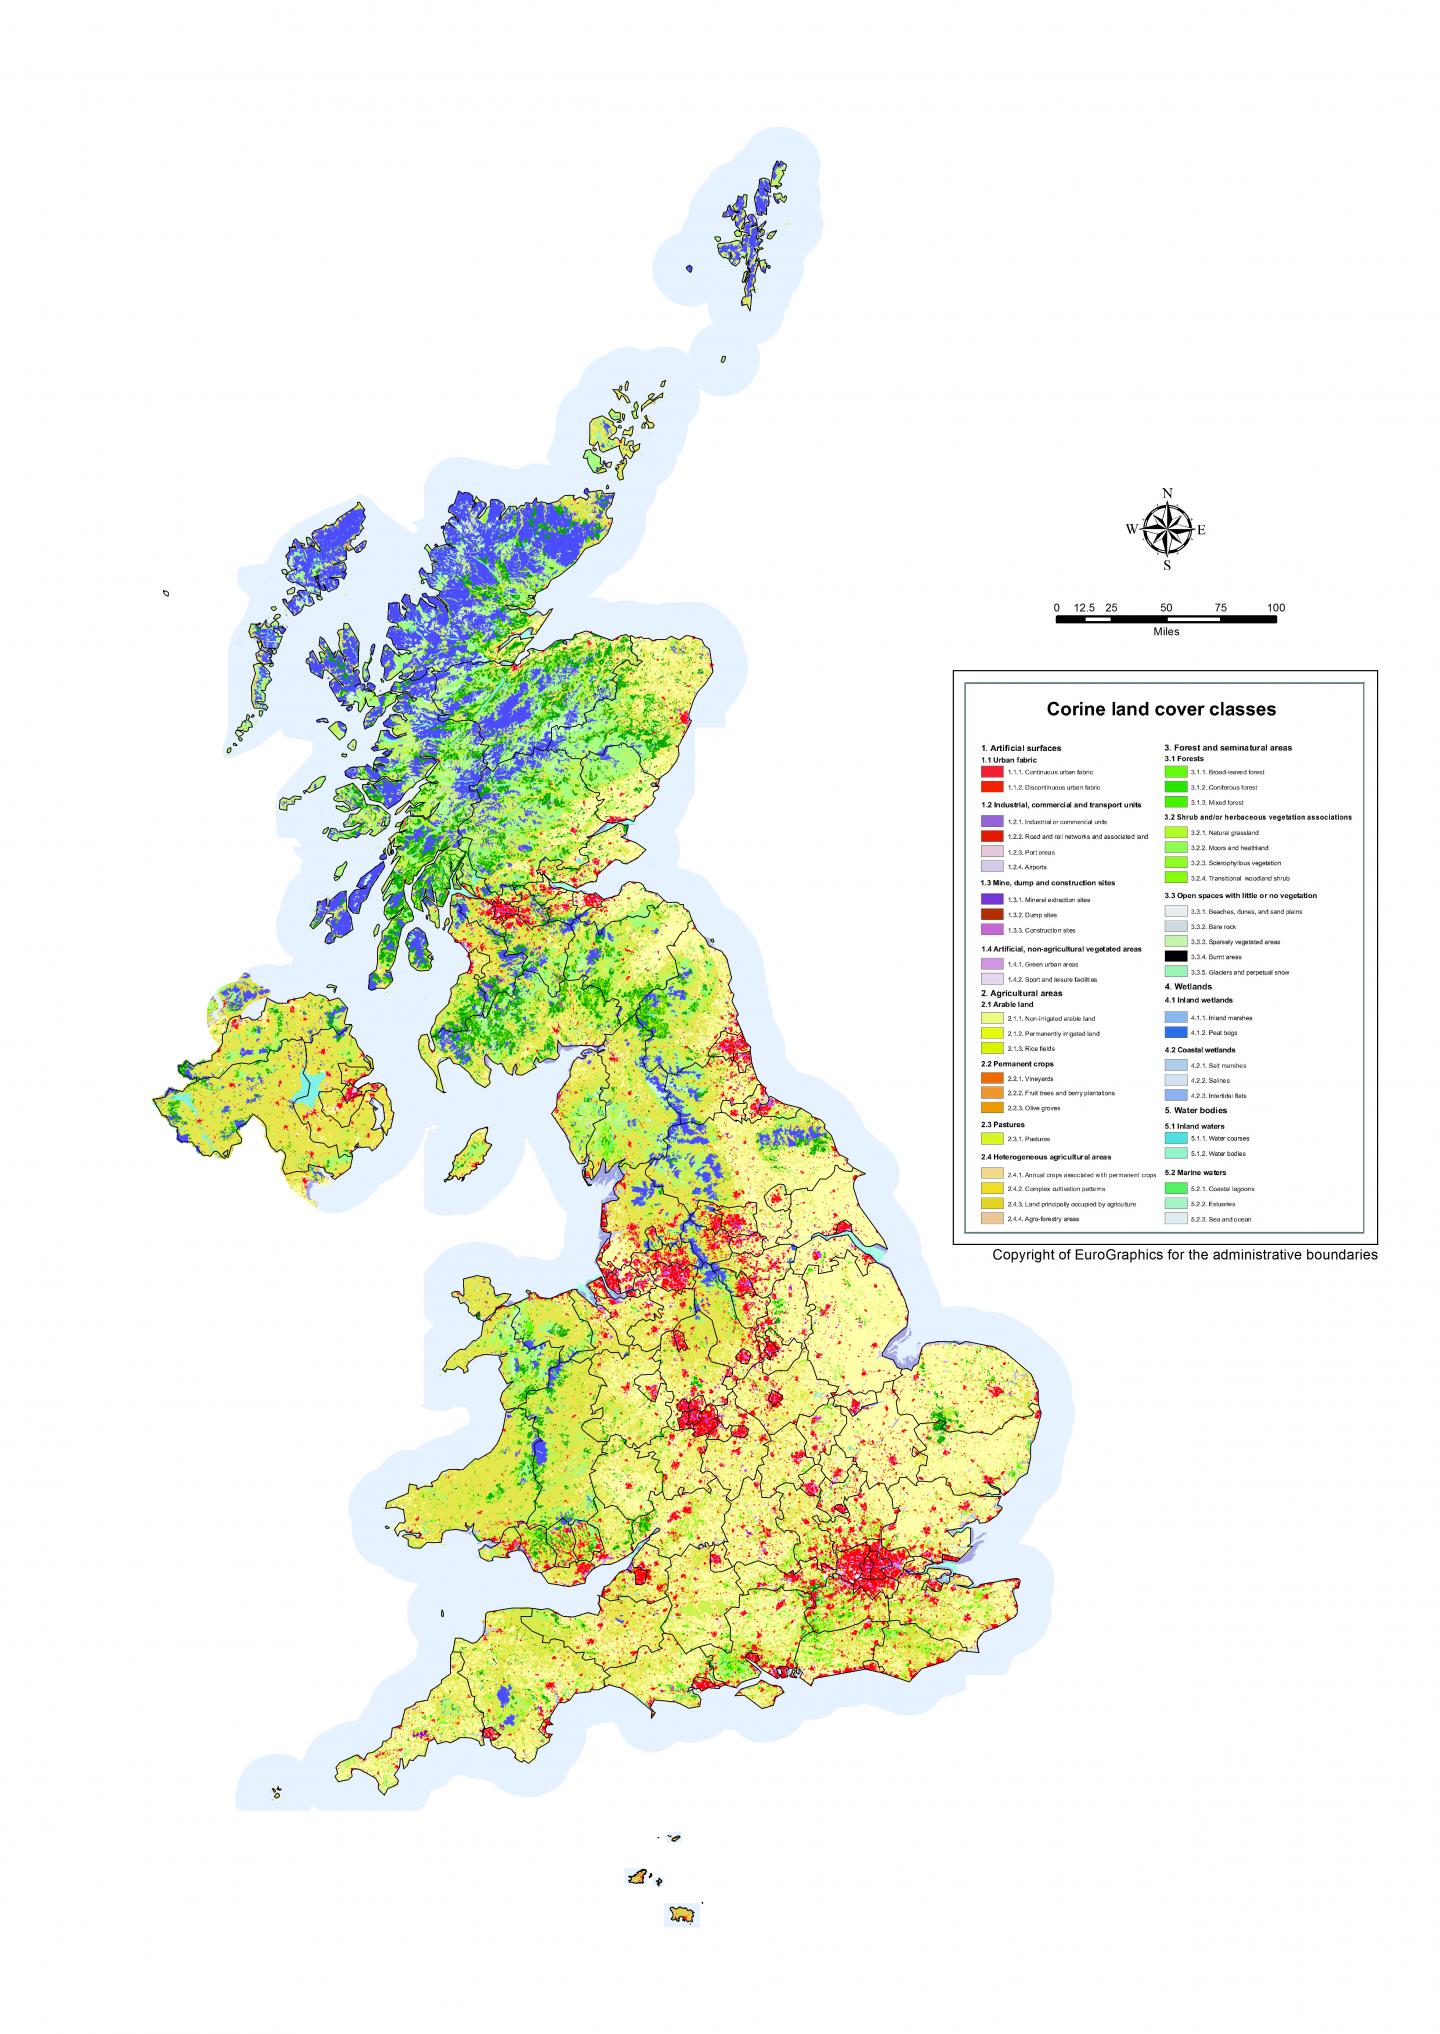 CORINE Land Cover Map 2012 for the UK